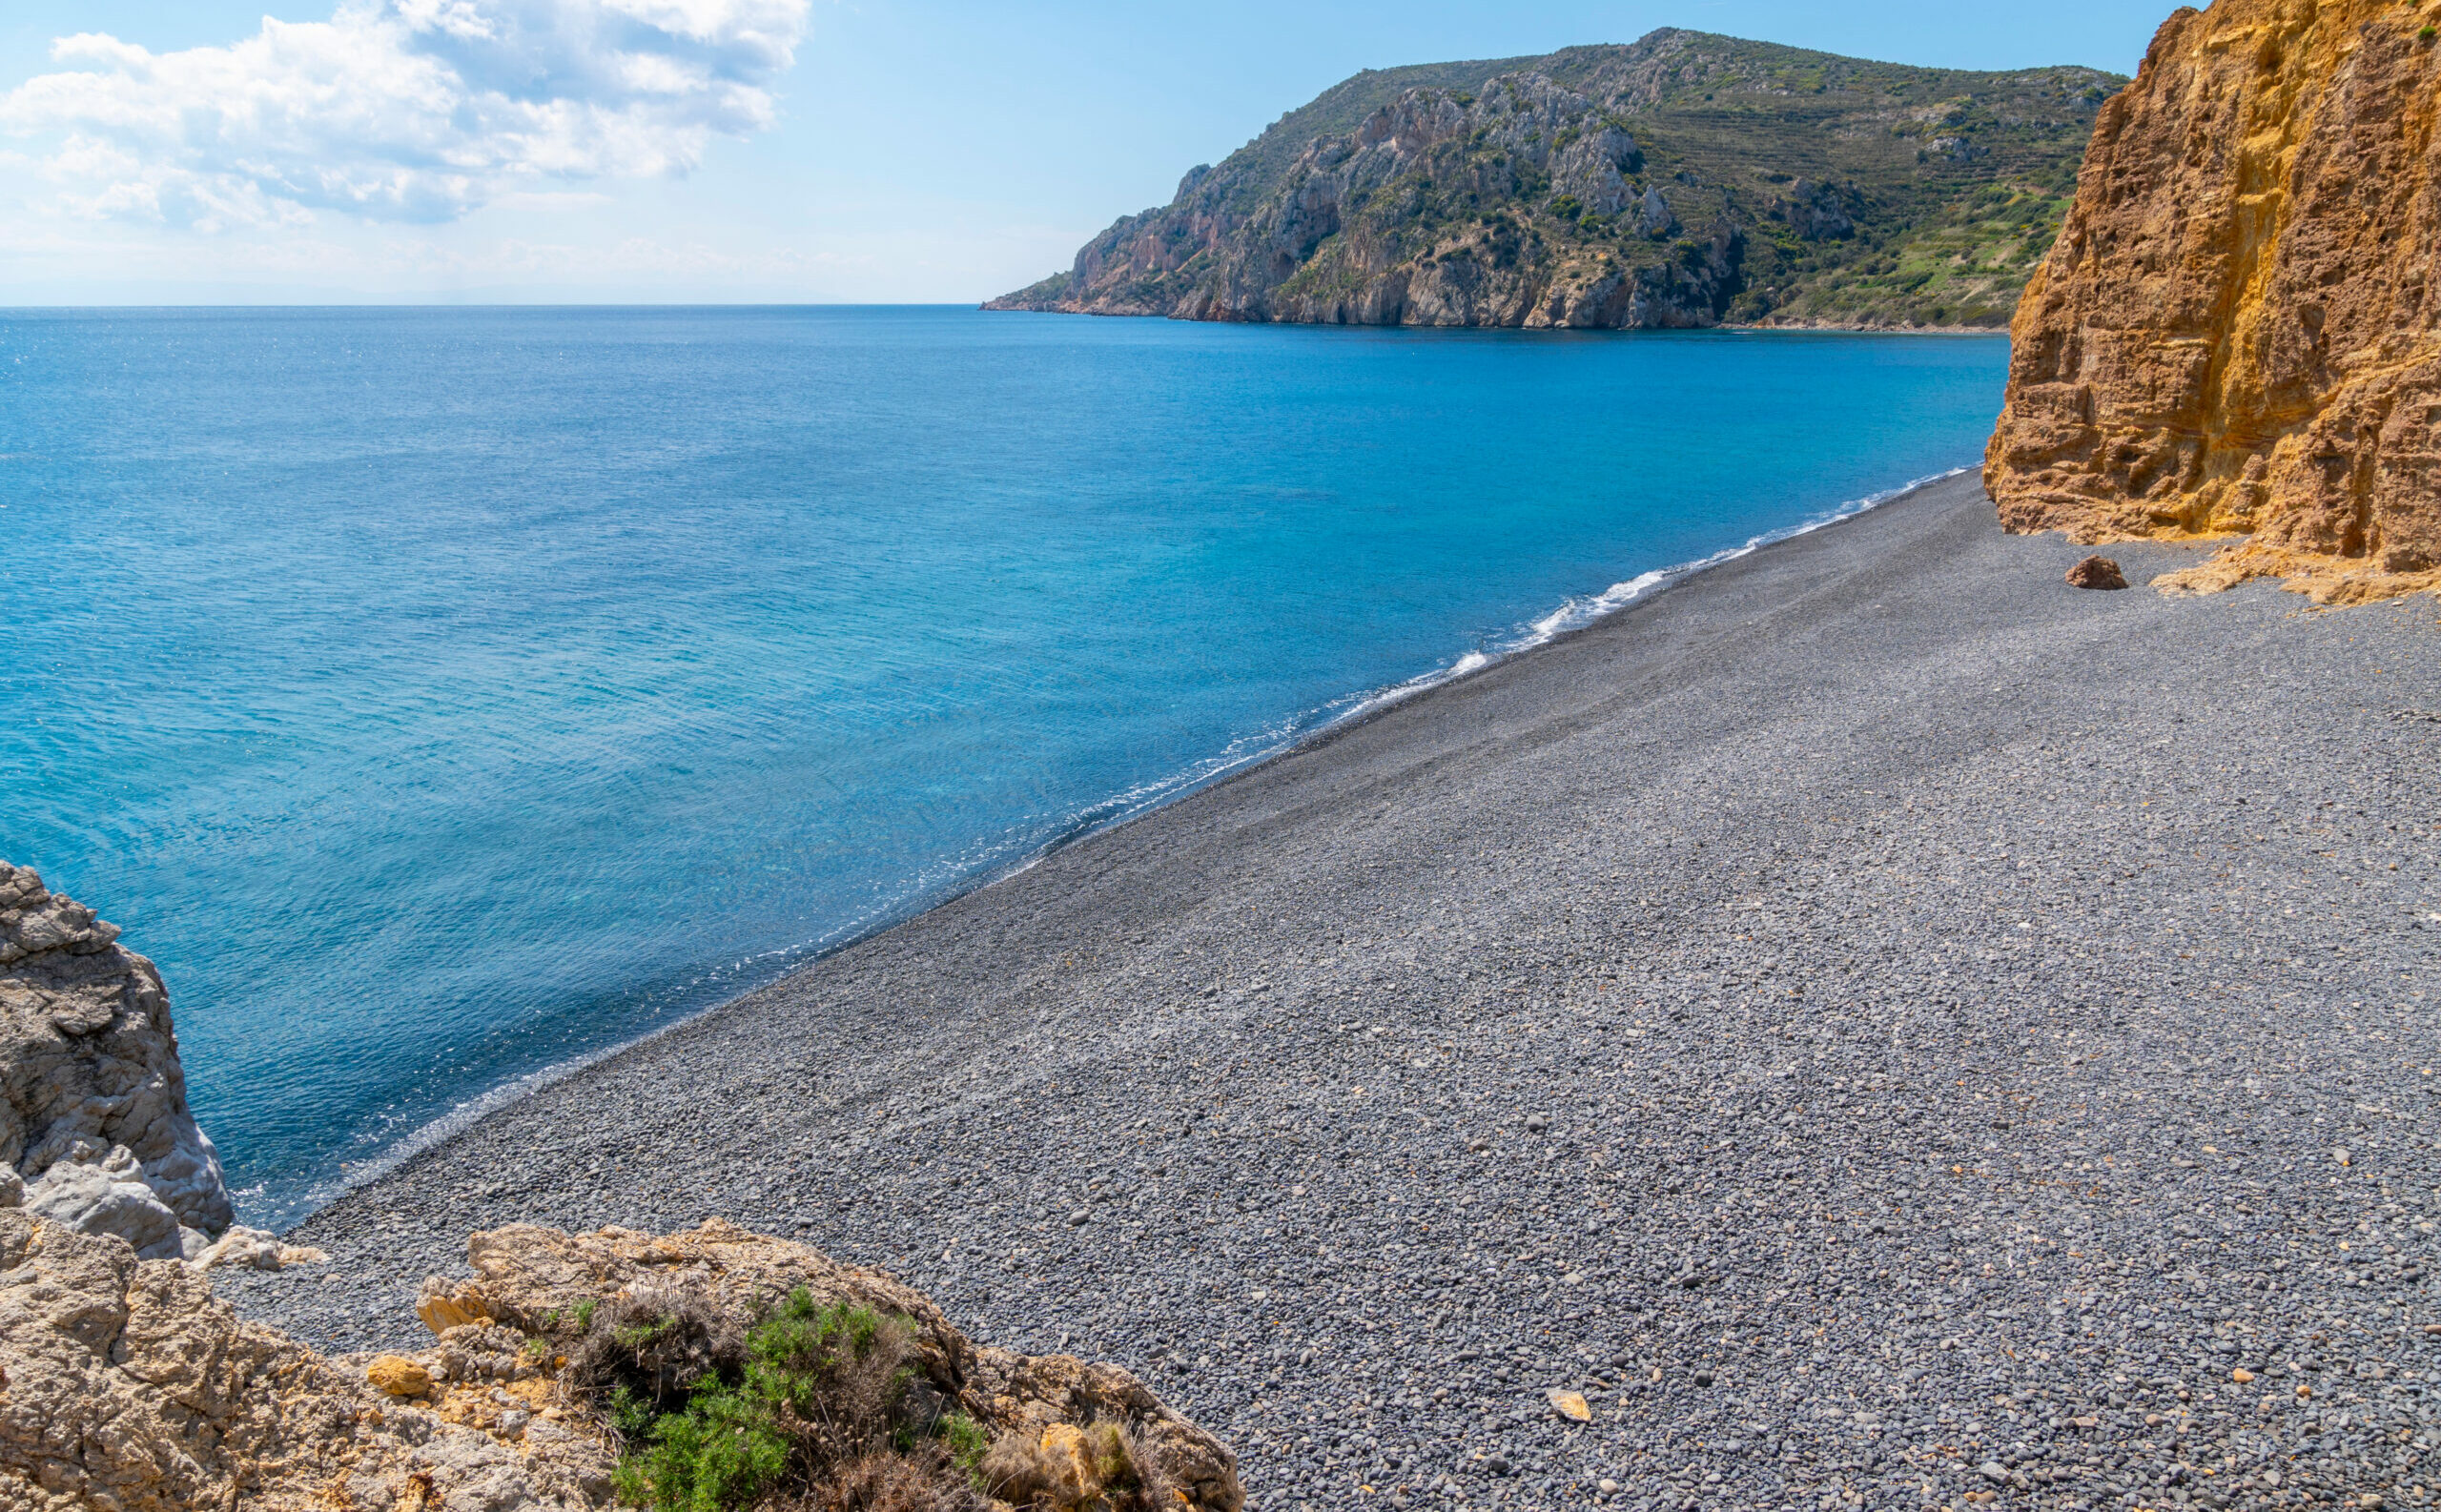 This is the most impressive “black” beach in Greece